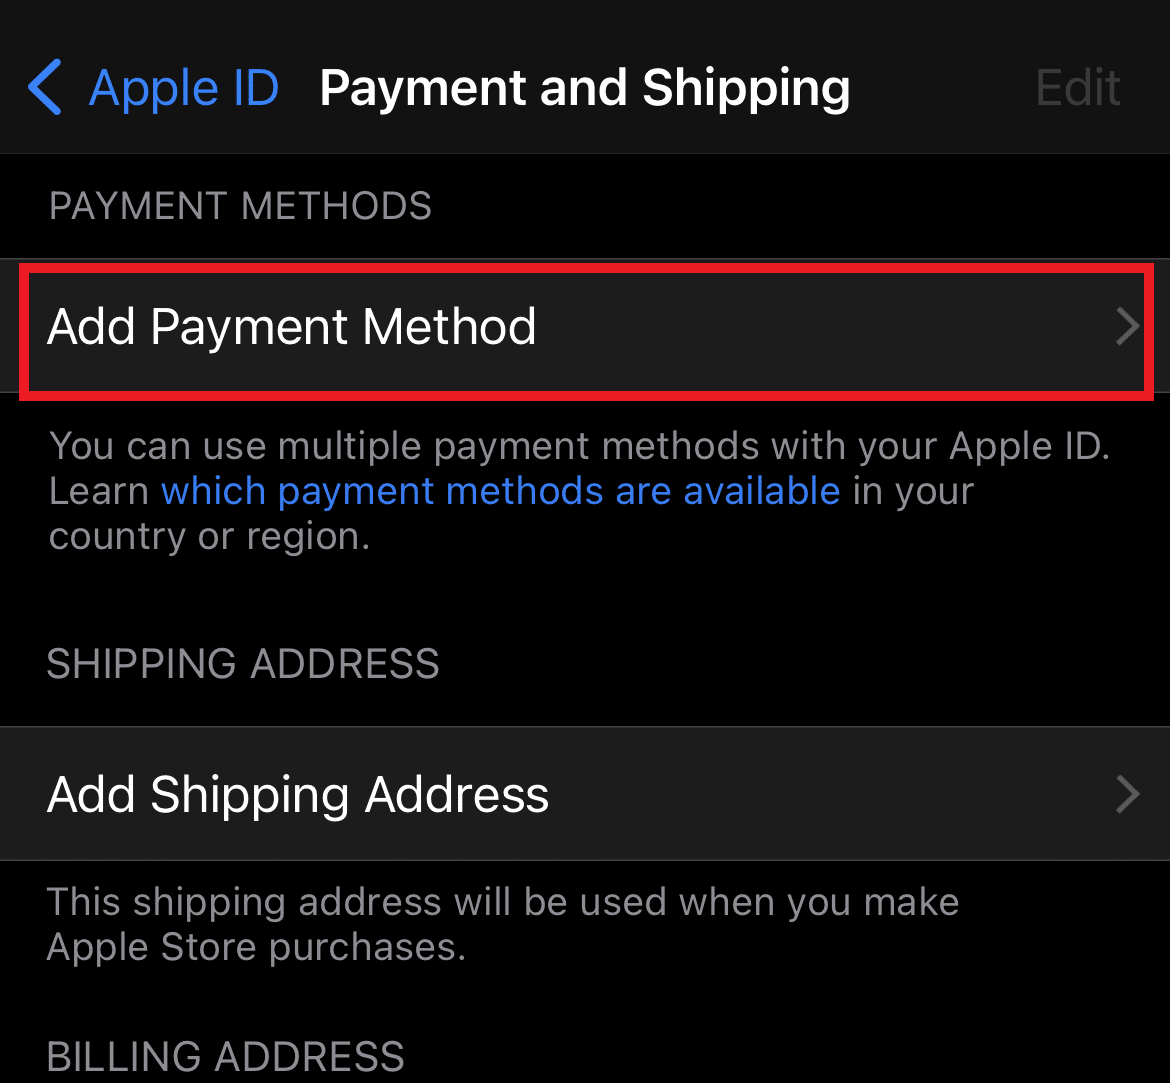 Open Apple ID in settings, go to payment and shipping to add payment method.